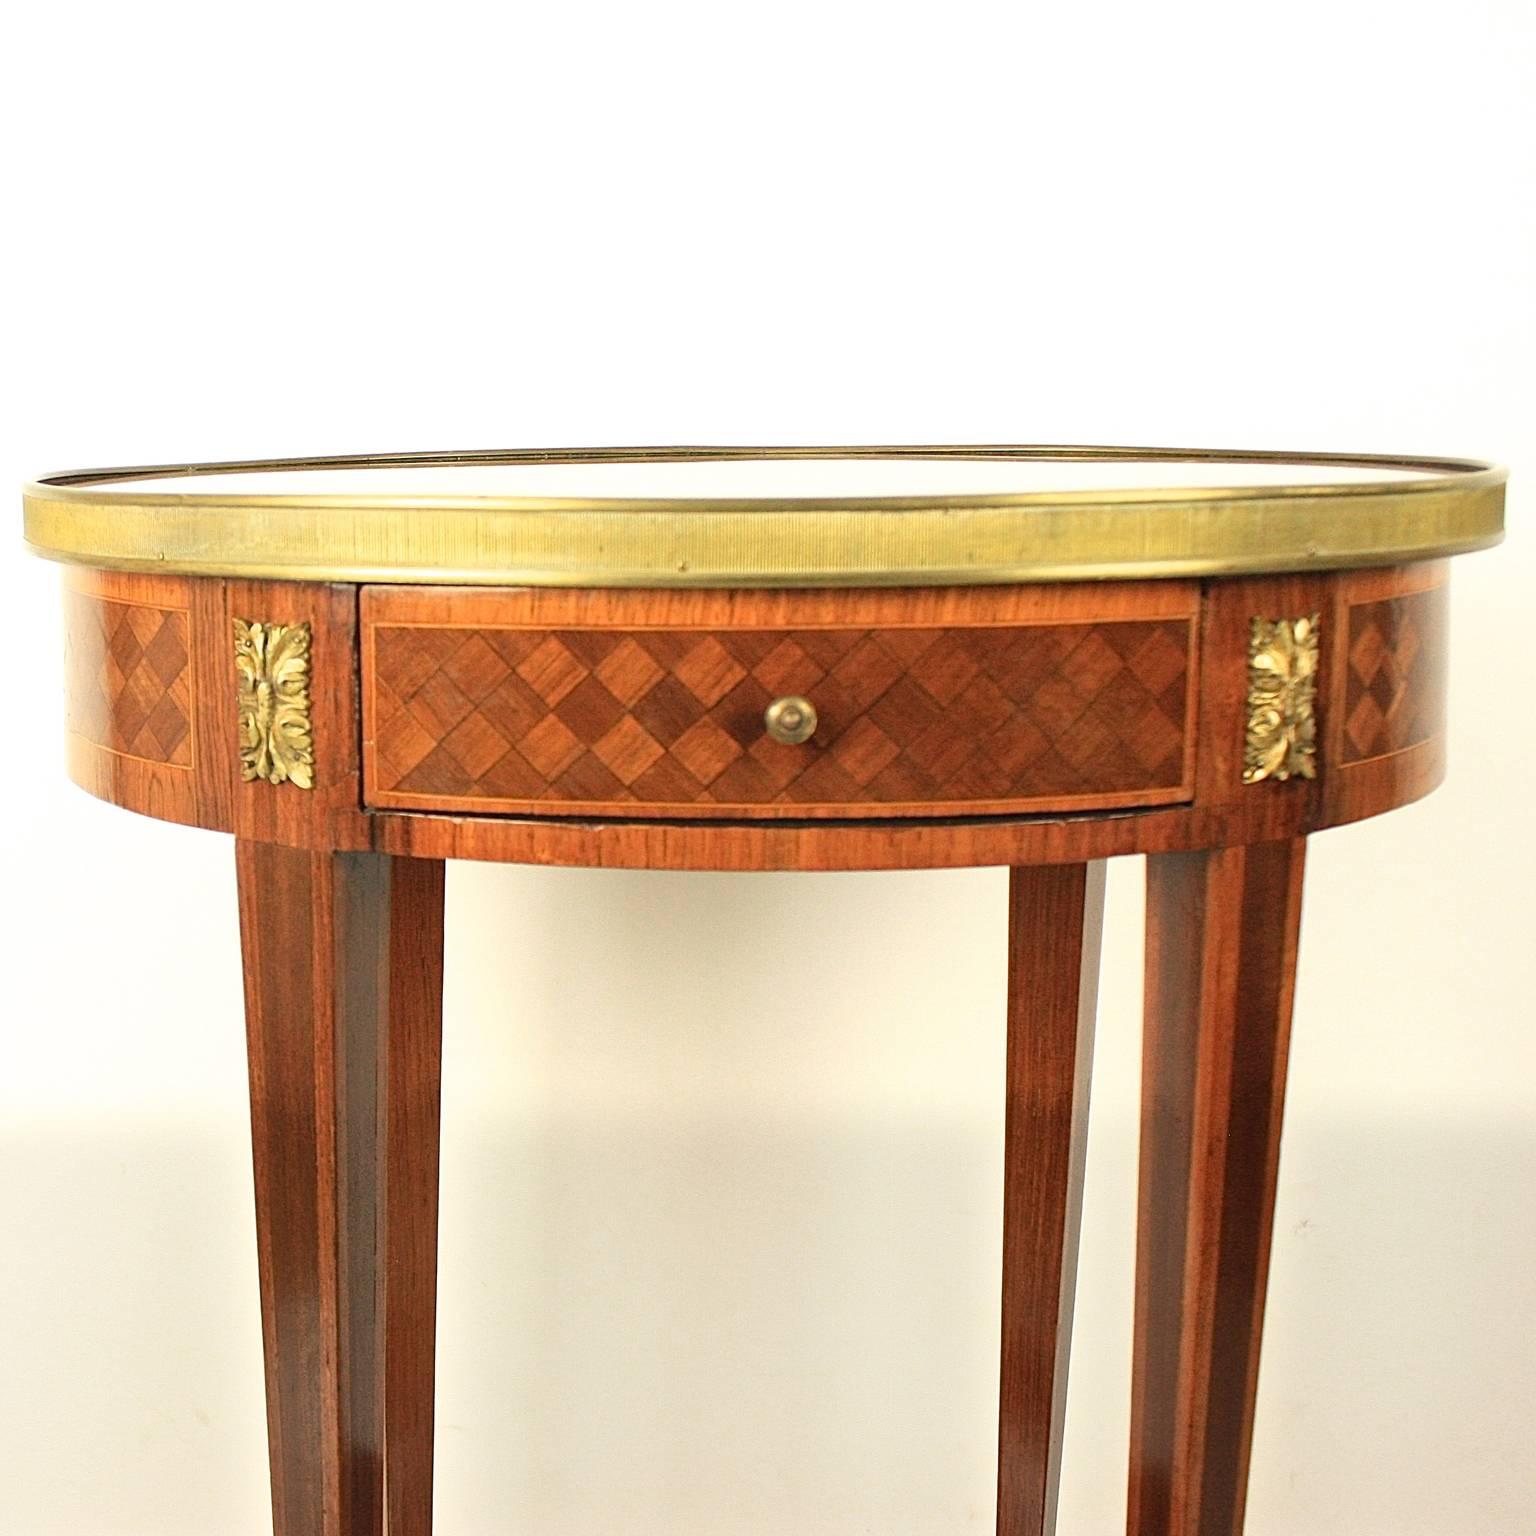 A small 19th century bronze-mounted marquetry side table of oval shape, with a breccia marble top in deep burgundy red and greyish white, surrounded by a 'Mille Raie' gallery above one frieze drawer with cube marquetry, joined by a conforming